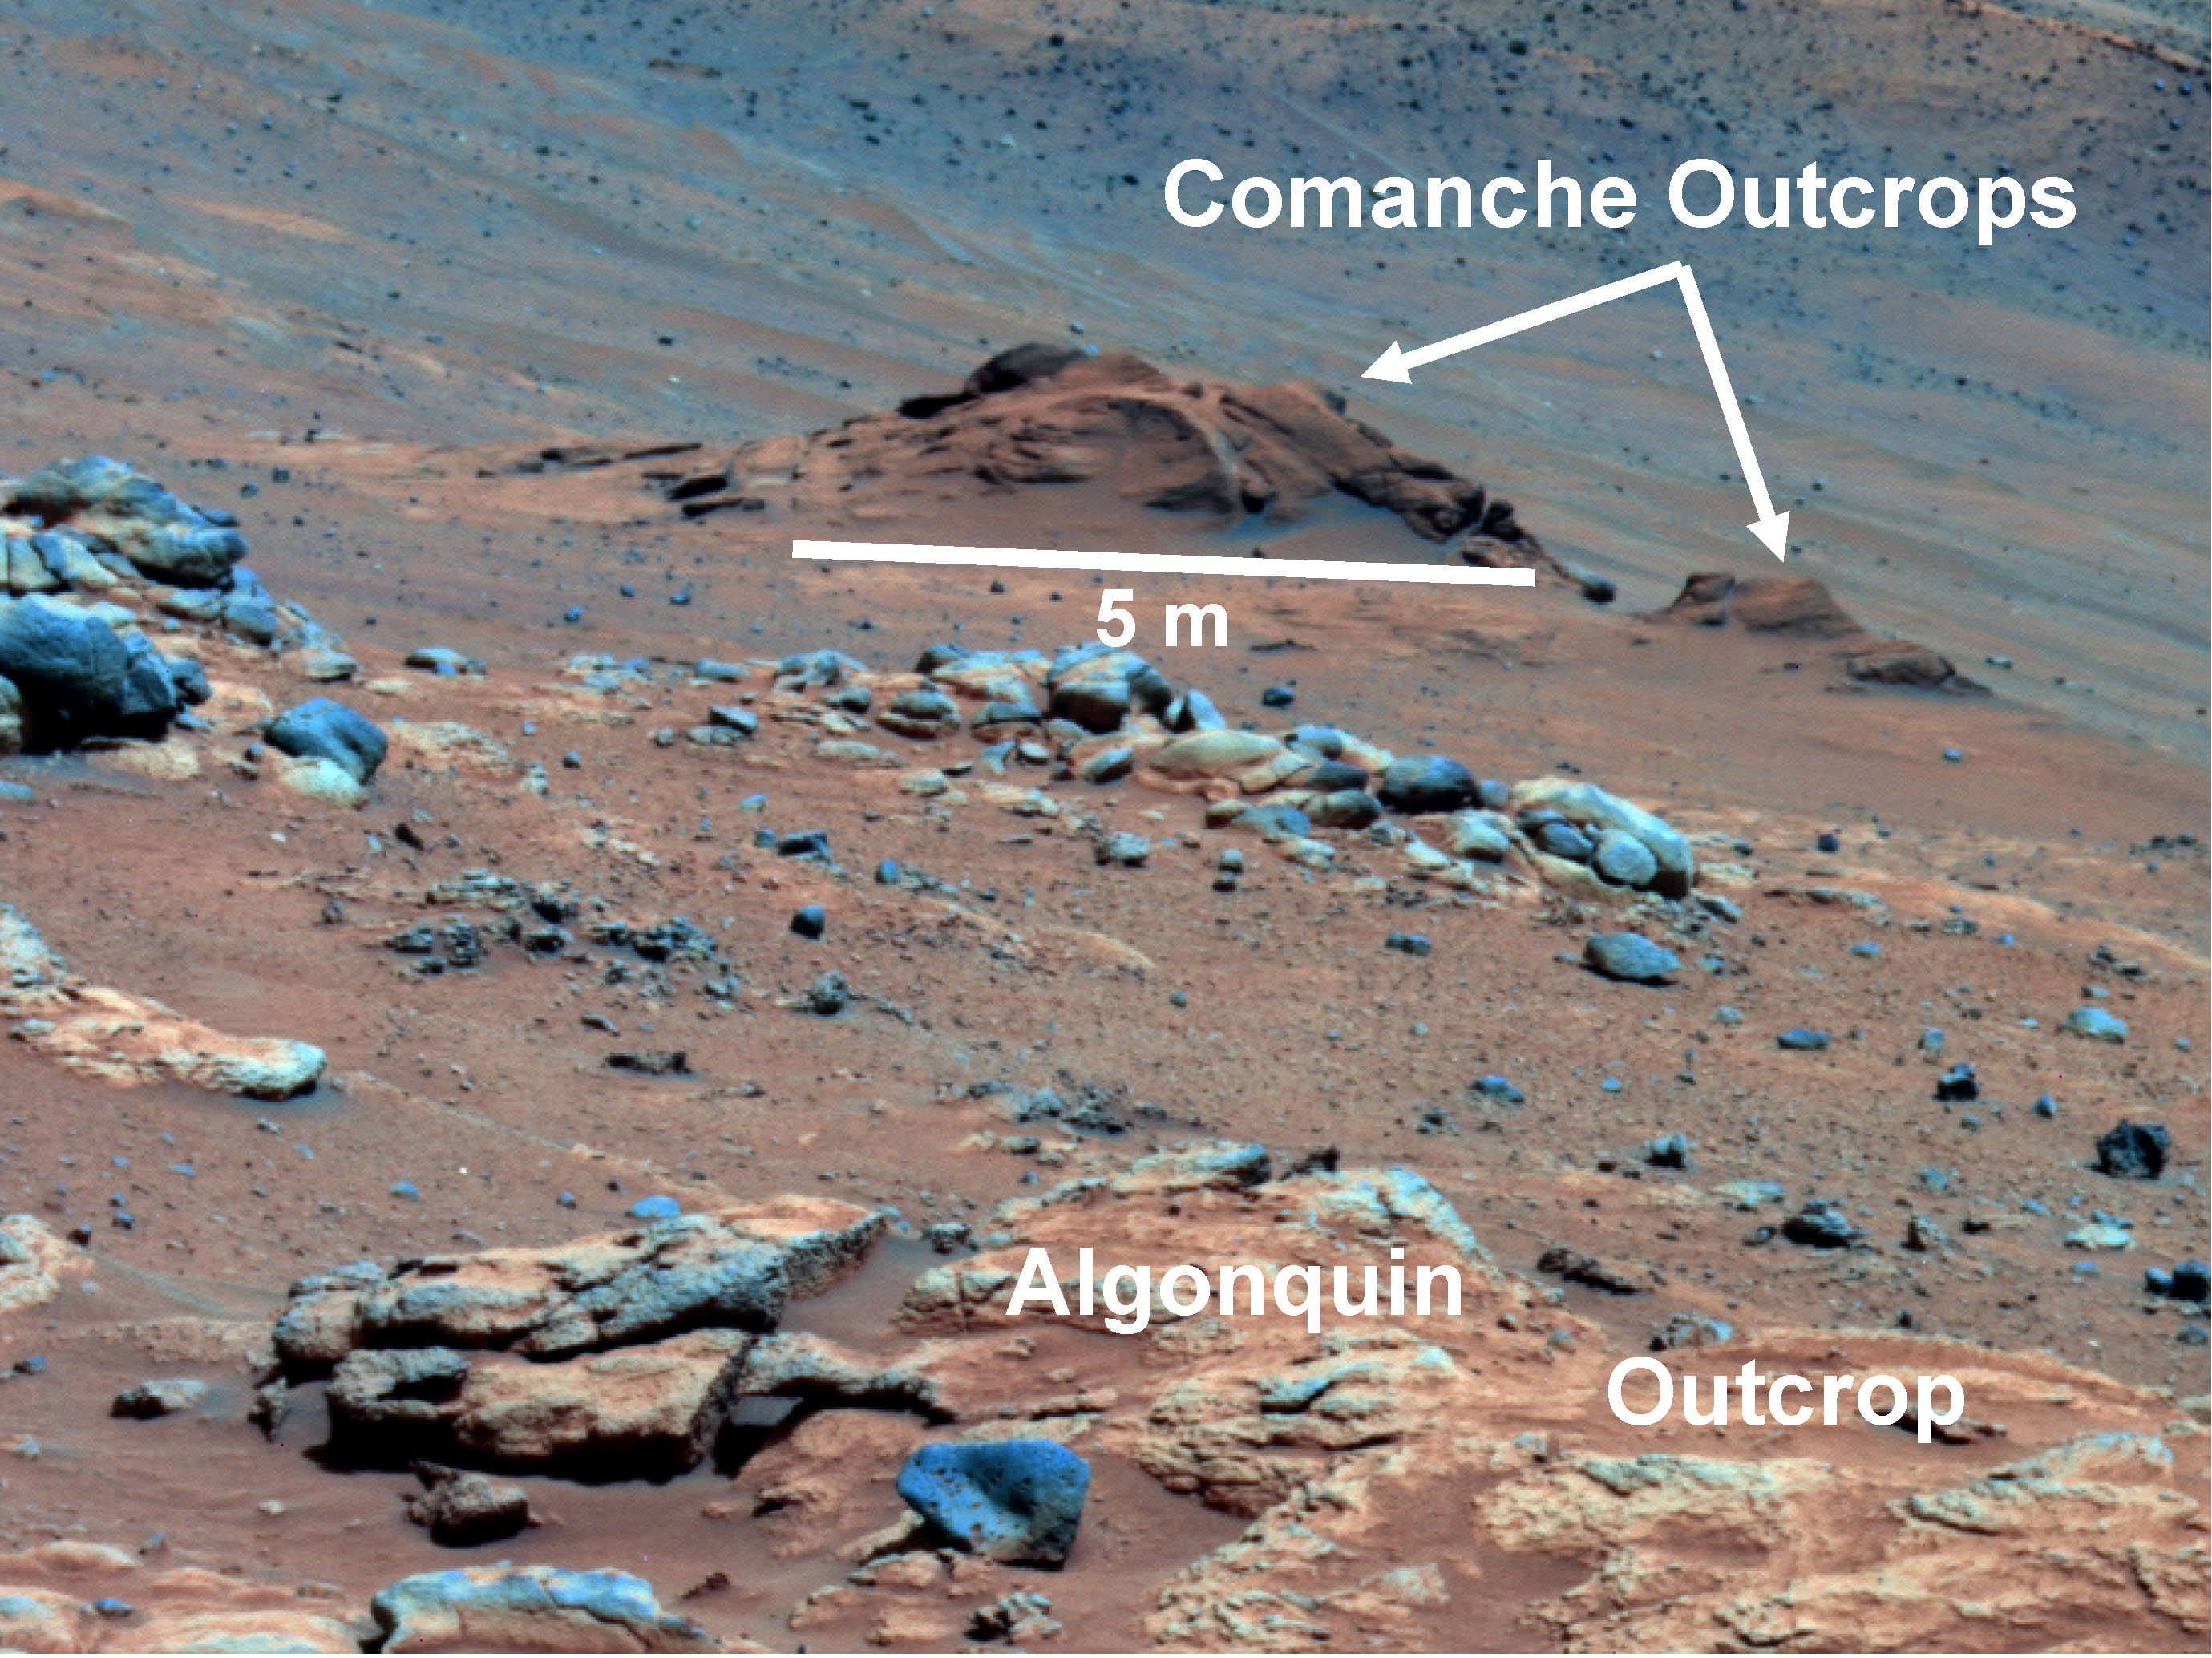 Carbonate-Containing Martian Rocks discovered by Spirit Mars Rover.  Spirit collected data in late 2005 which confirmed that the Comanche outcrop contains magnesium iron carbonate, a mineral indicating the past environment was wet and non-acidic, possibly favorable to life. This view was captured during Sol 689 on Mars (Dec. 11, 2005). The find at Comanche is the first unambiguous evidence from either Spirit or Opportunity for a past Martian environment that may have been more favorable to life than the wet but acidic conditions indicated by the rovers' earlier finds. Credit: NASA/JPL-Caltech/Cornell University